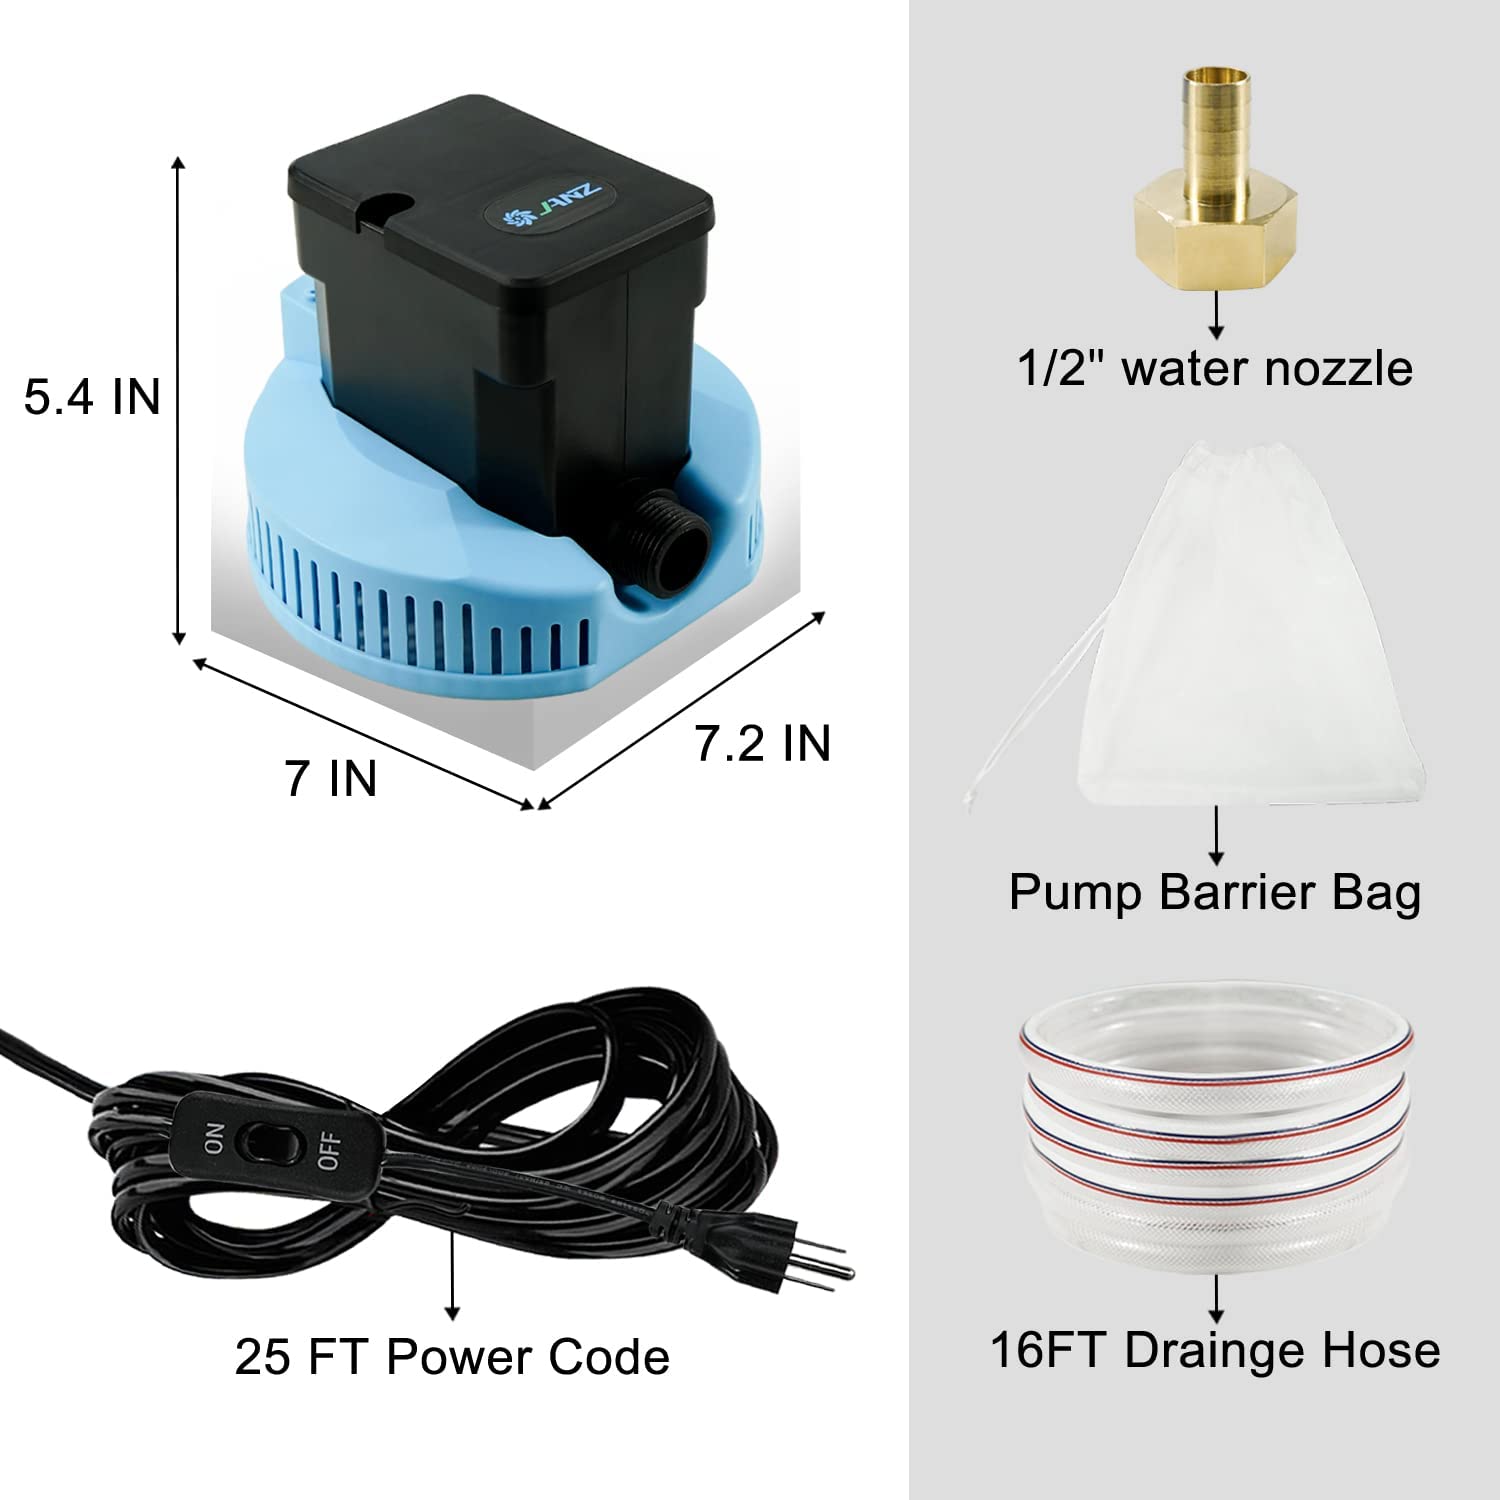 110W Pool Cover Pump Submersible Water Pump for Pool Draining with